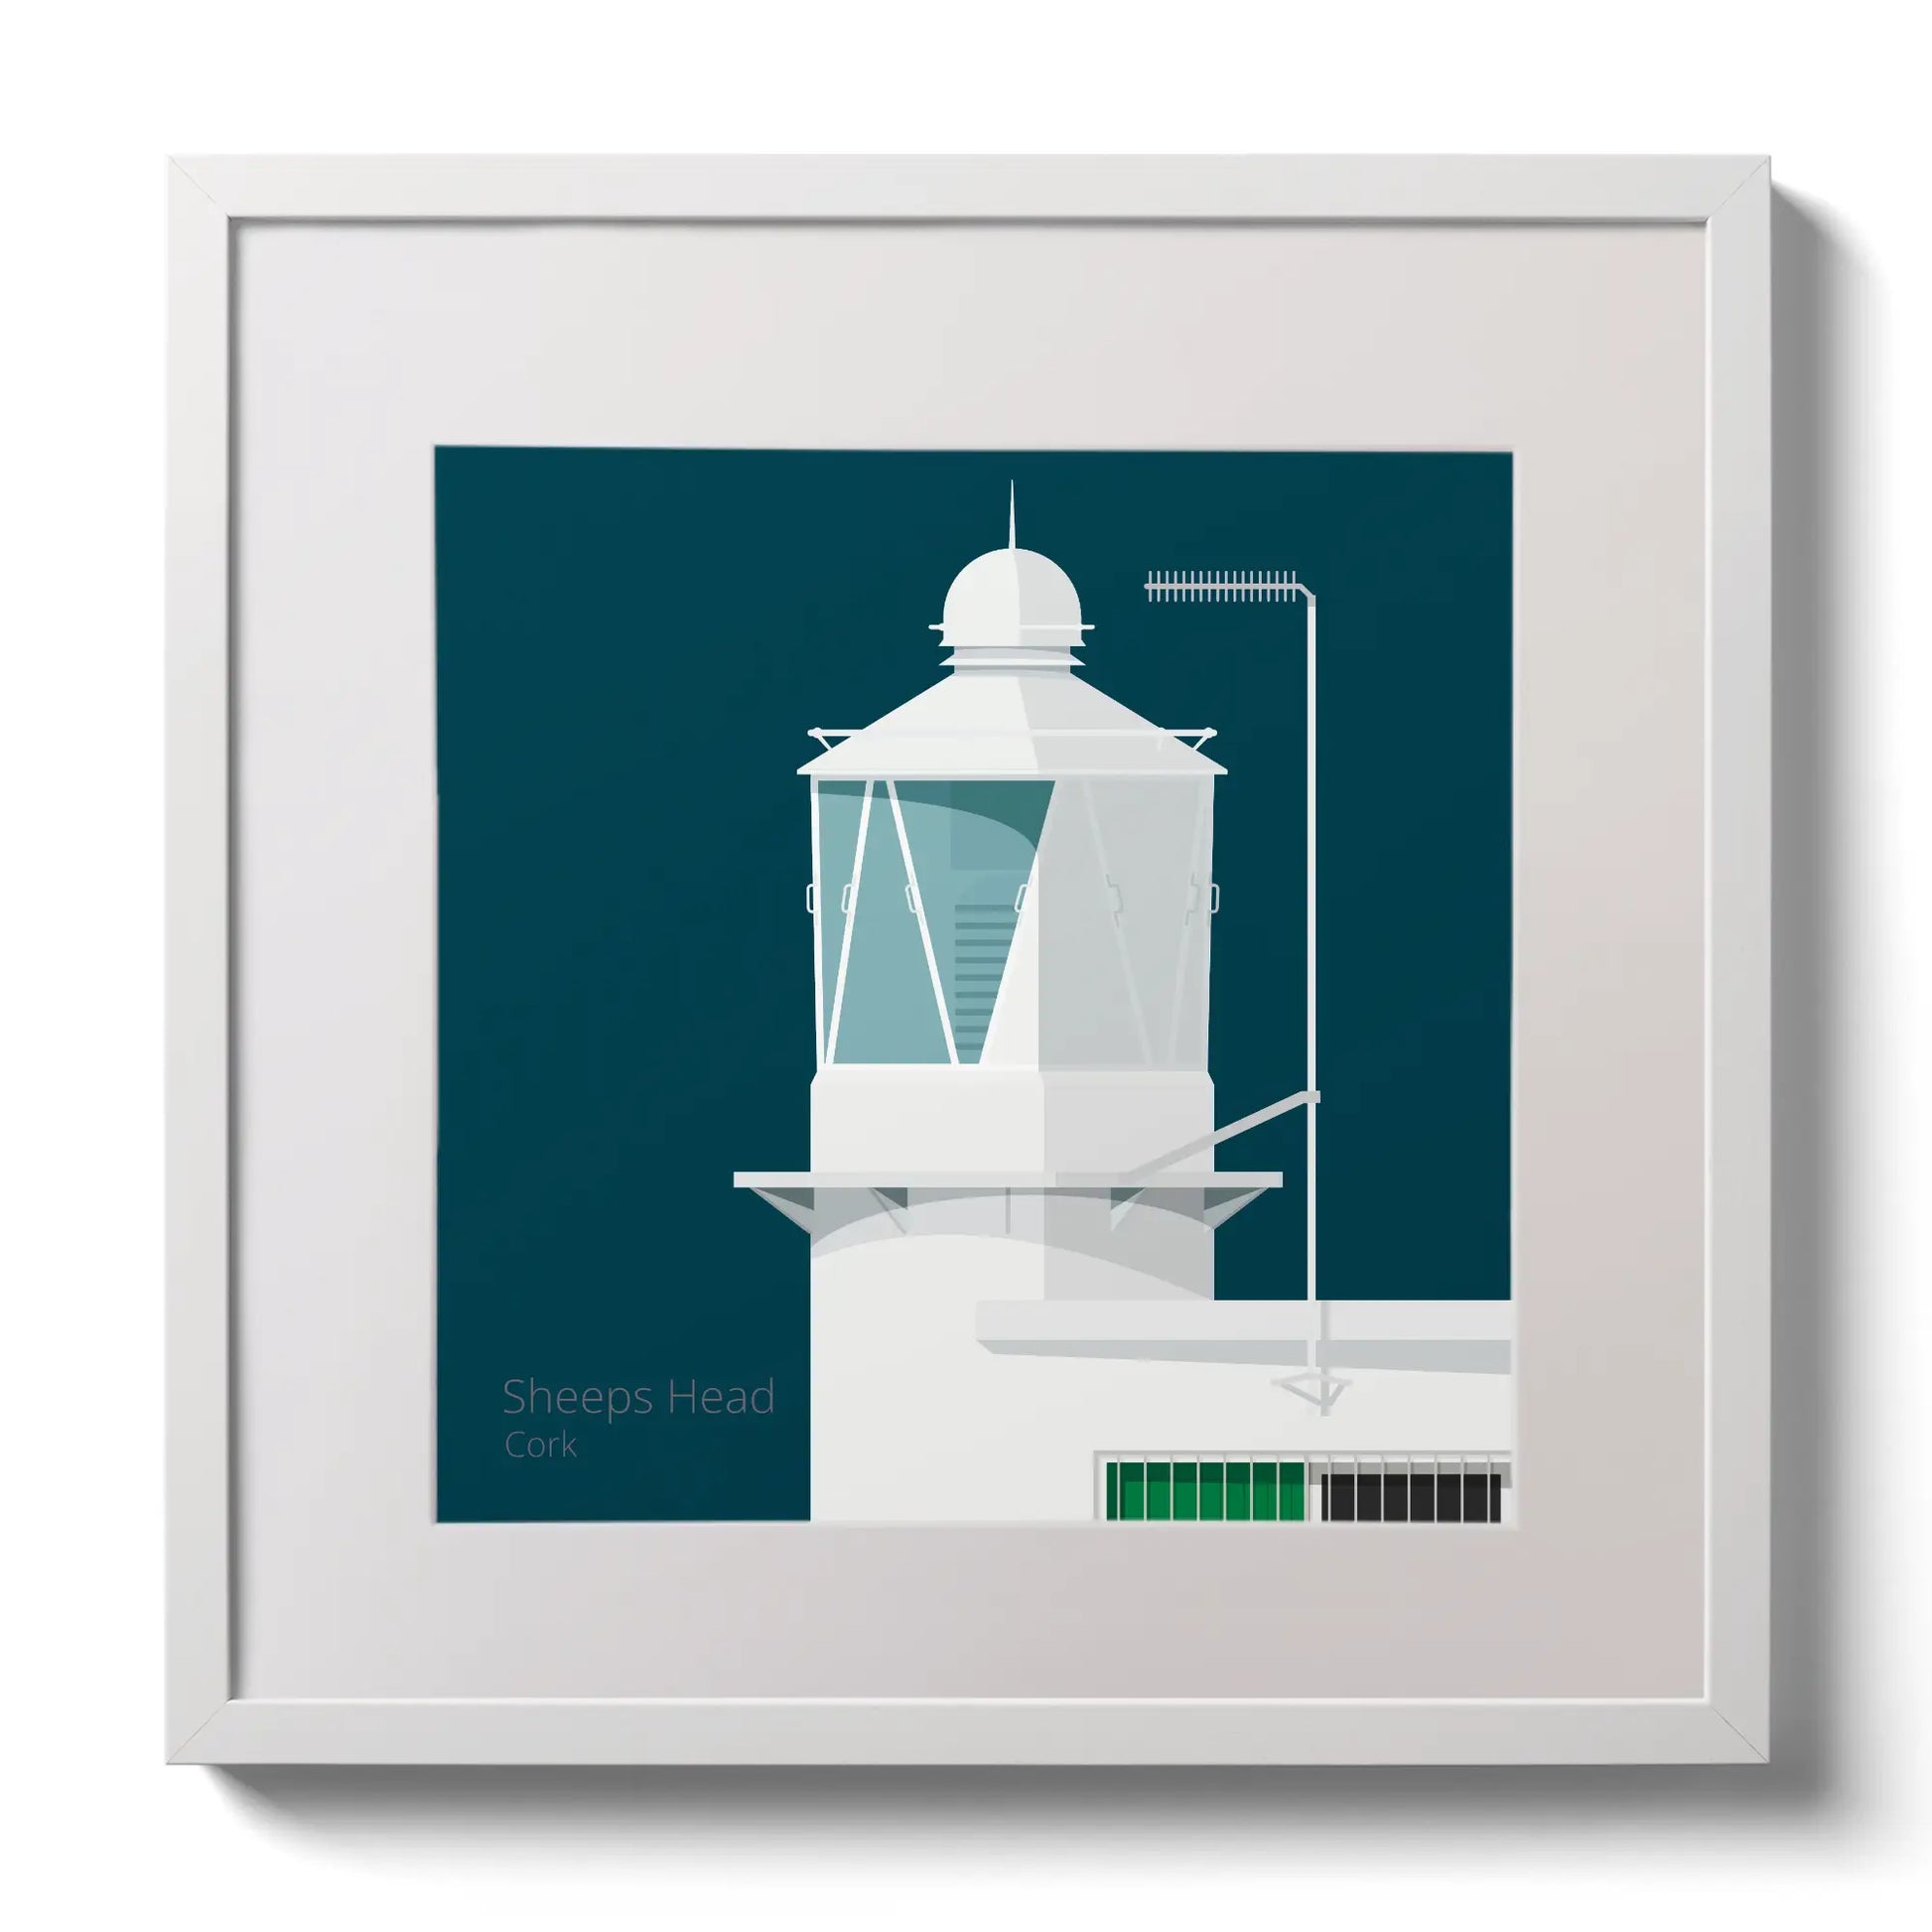 Illustration  Sheeps Head lighthouse on a midnight blue background,  in a white square frame measuring 30x30cm.